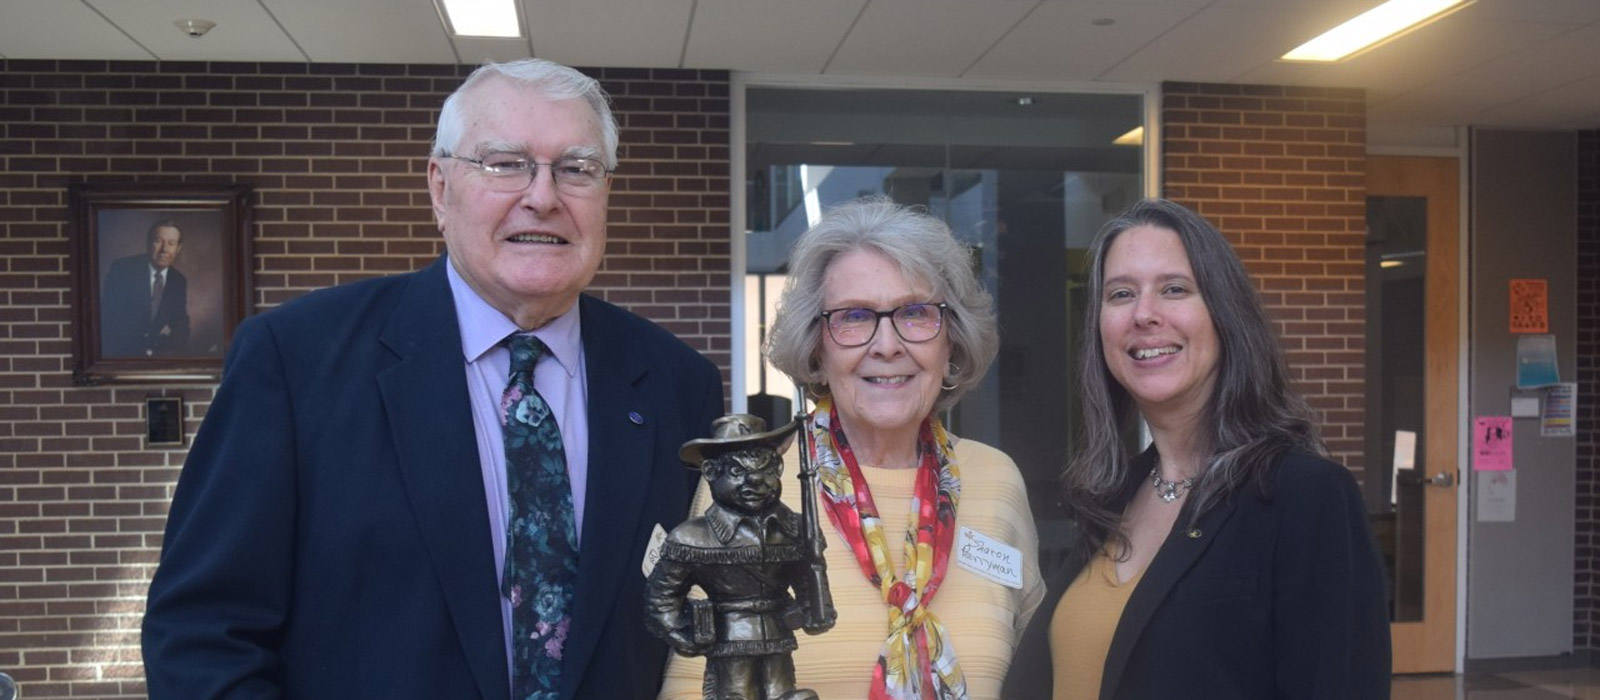 Dr. Bruce Perryman, President’s Award recipient, and wife, Sharon, presented an NJC Plainsman bronze desktop sculpture made by local artist Bradford Rhea to NJC Alumni Association Executive Director Heather Brungardt at the Hoops Homecoming Awards Luncheon Saturday, Feb. 19, 2022. Early on in his presidency at NJC, Perryman commissioned Rhea to create the sculpture and it has since resided in his office for many years.